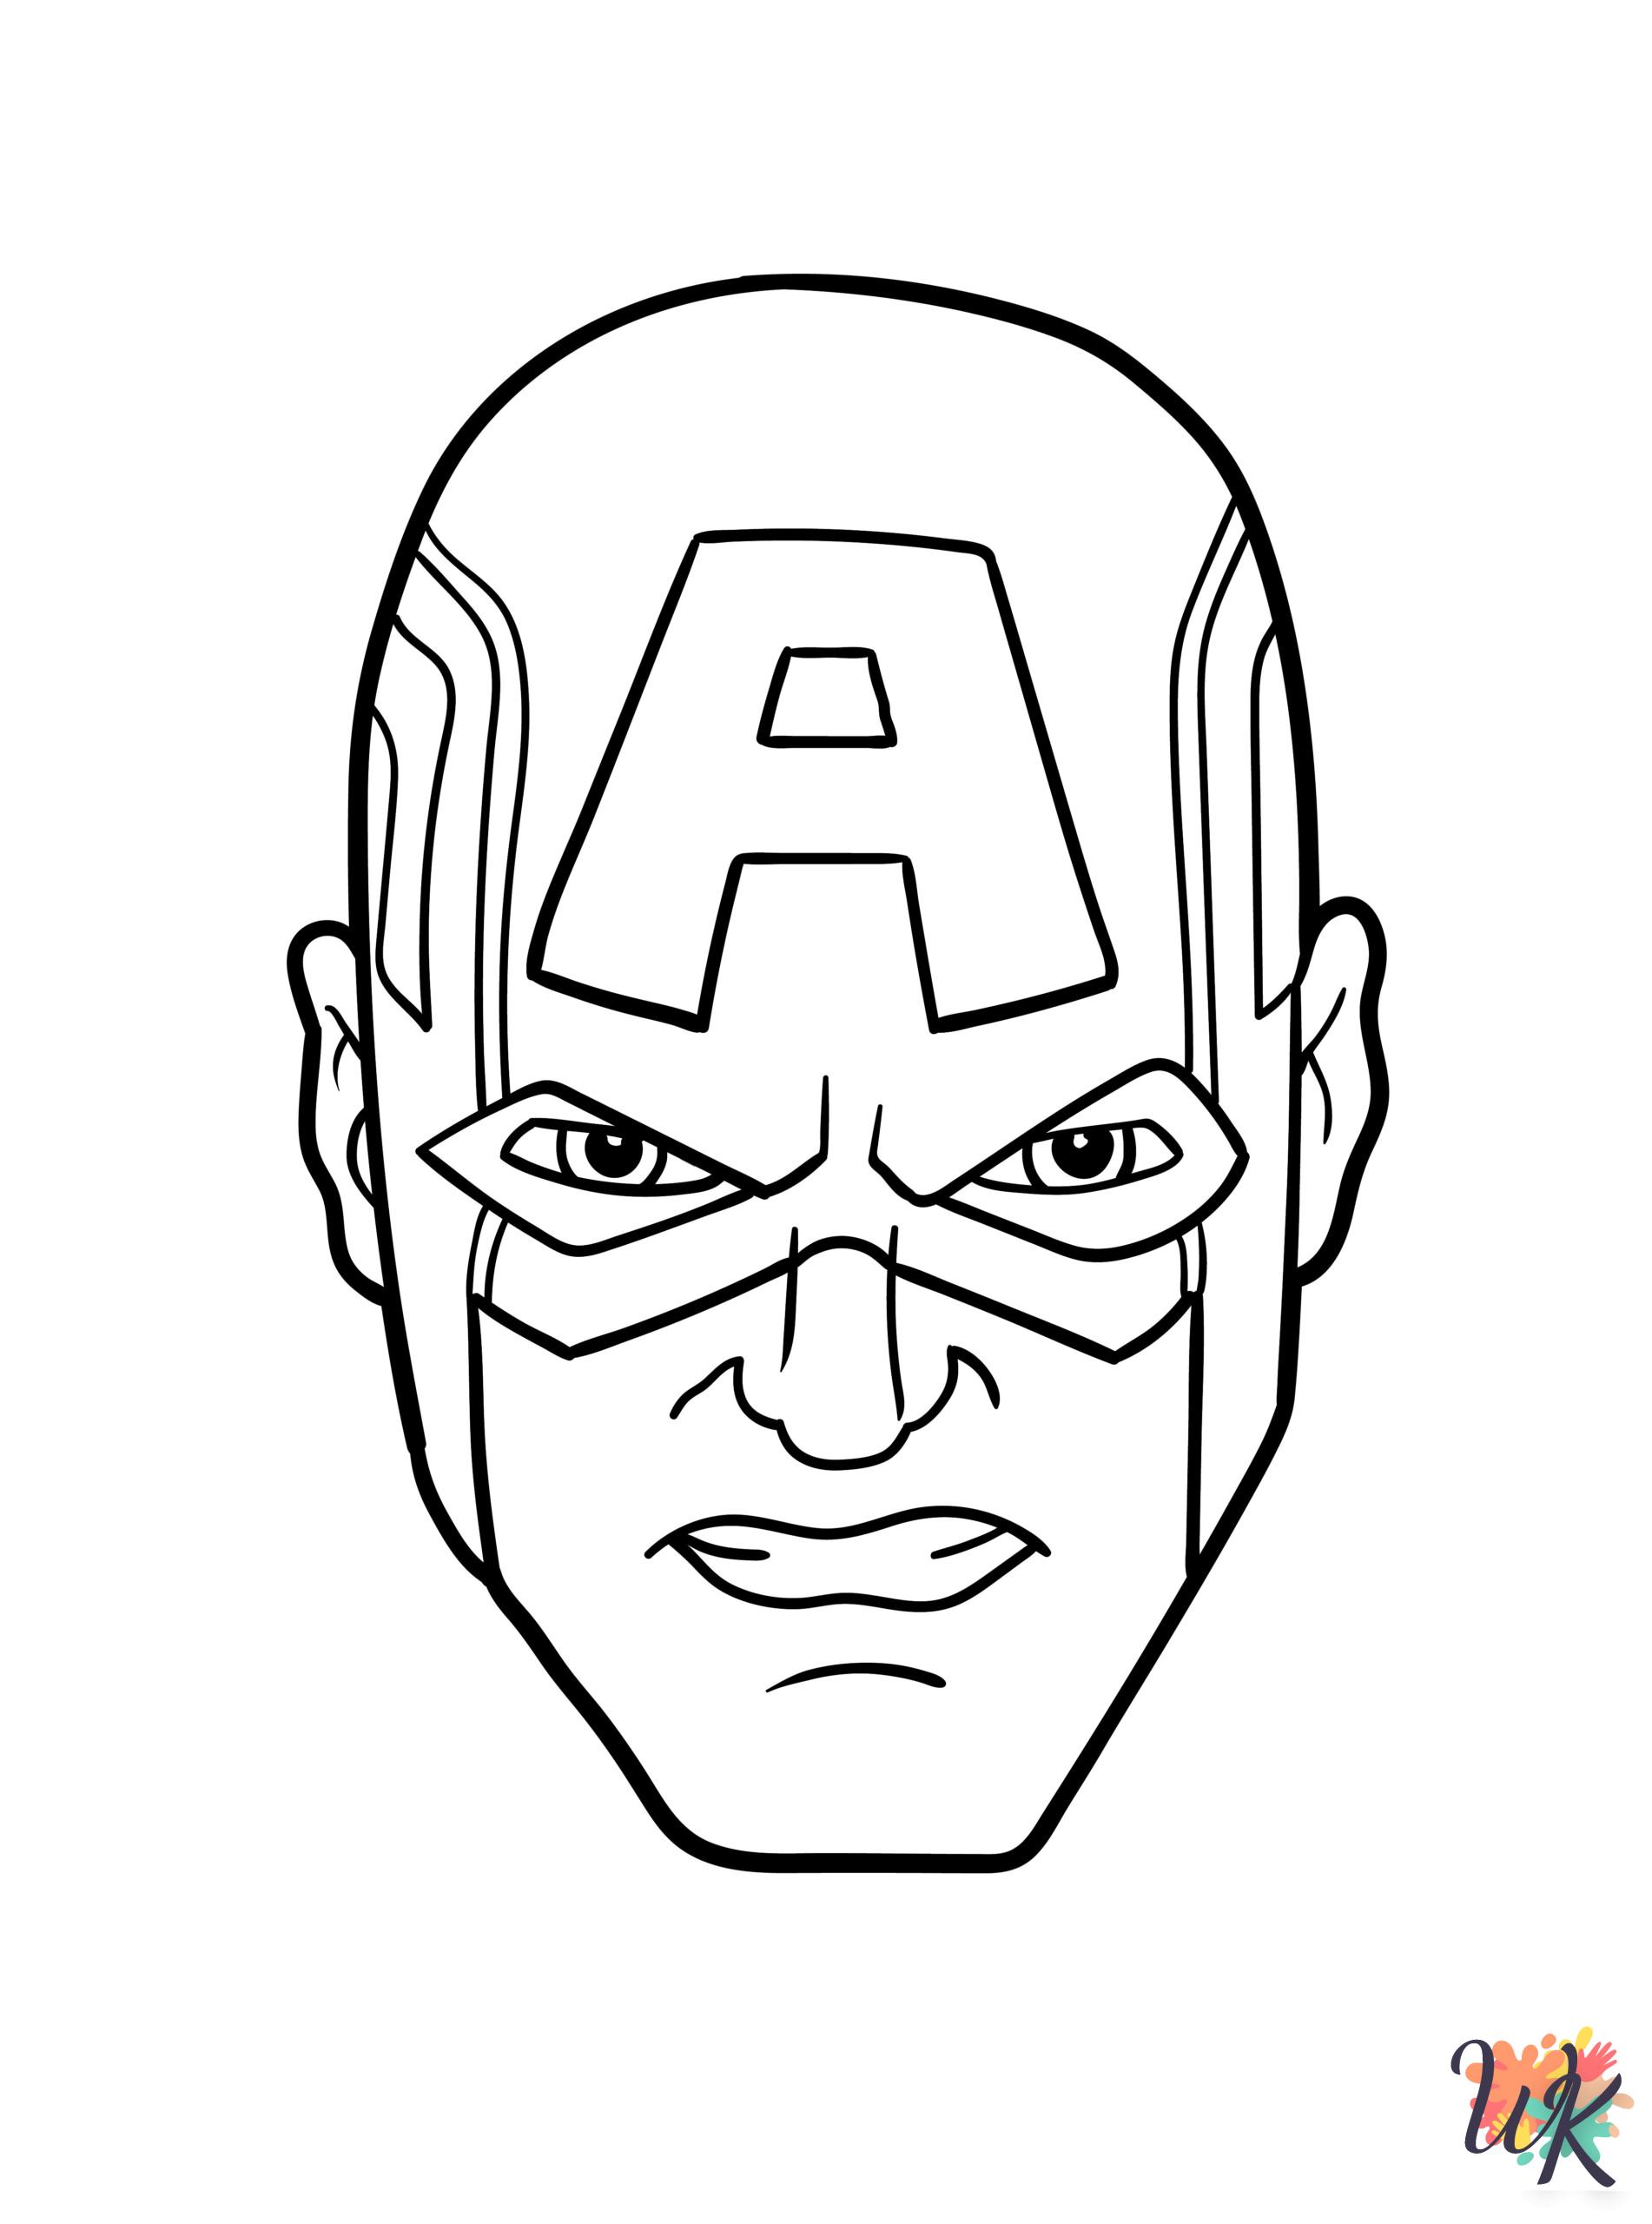 Superhero decorations coloring pages